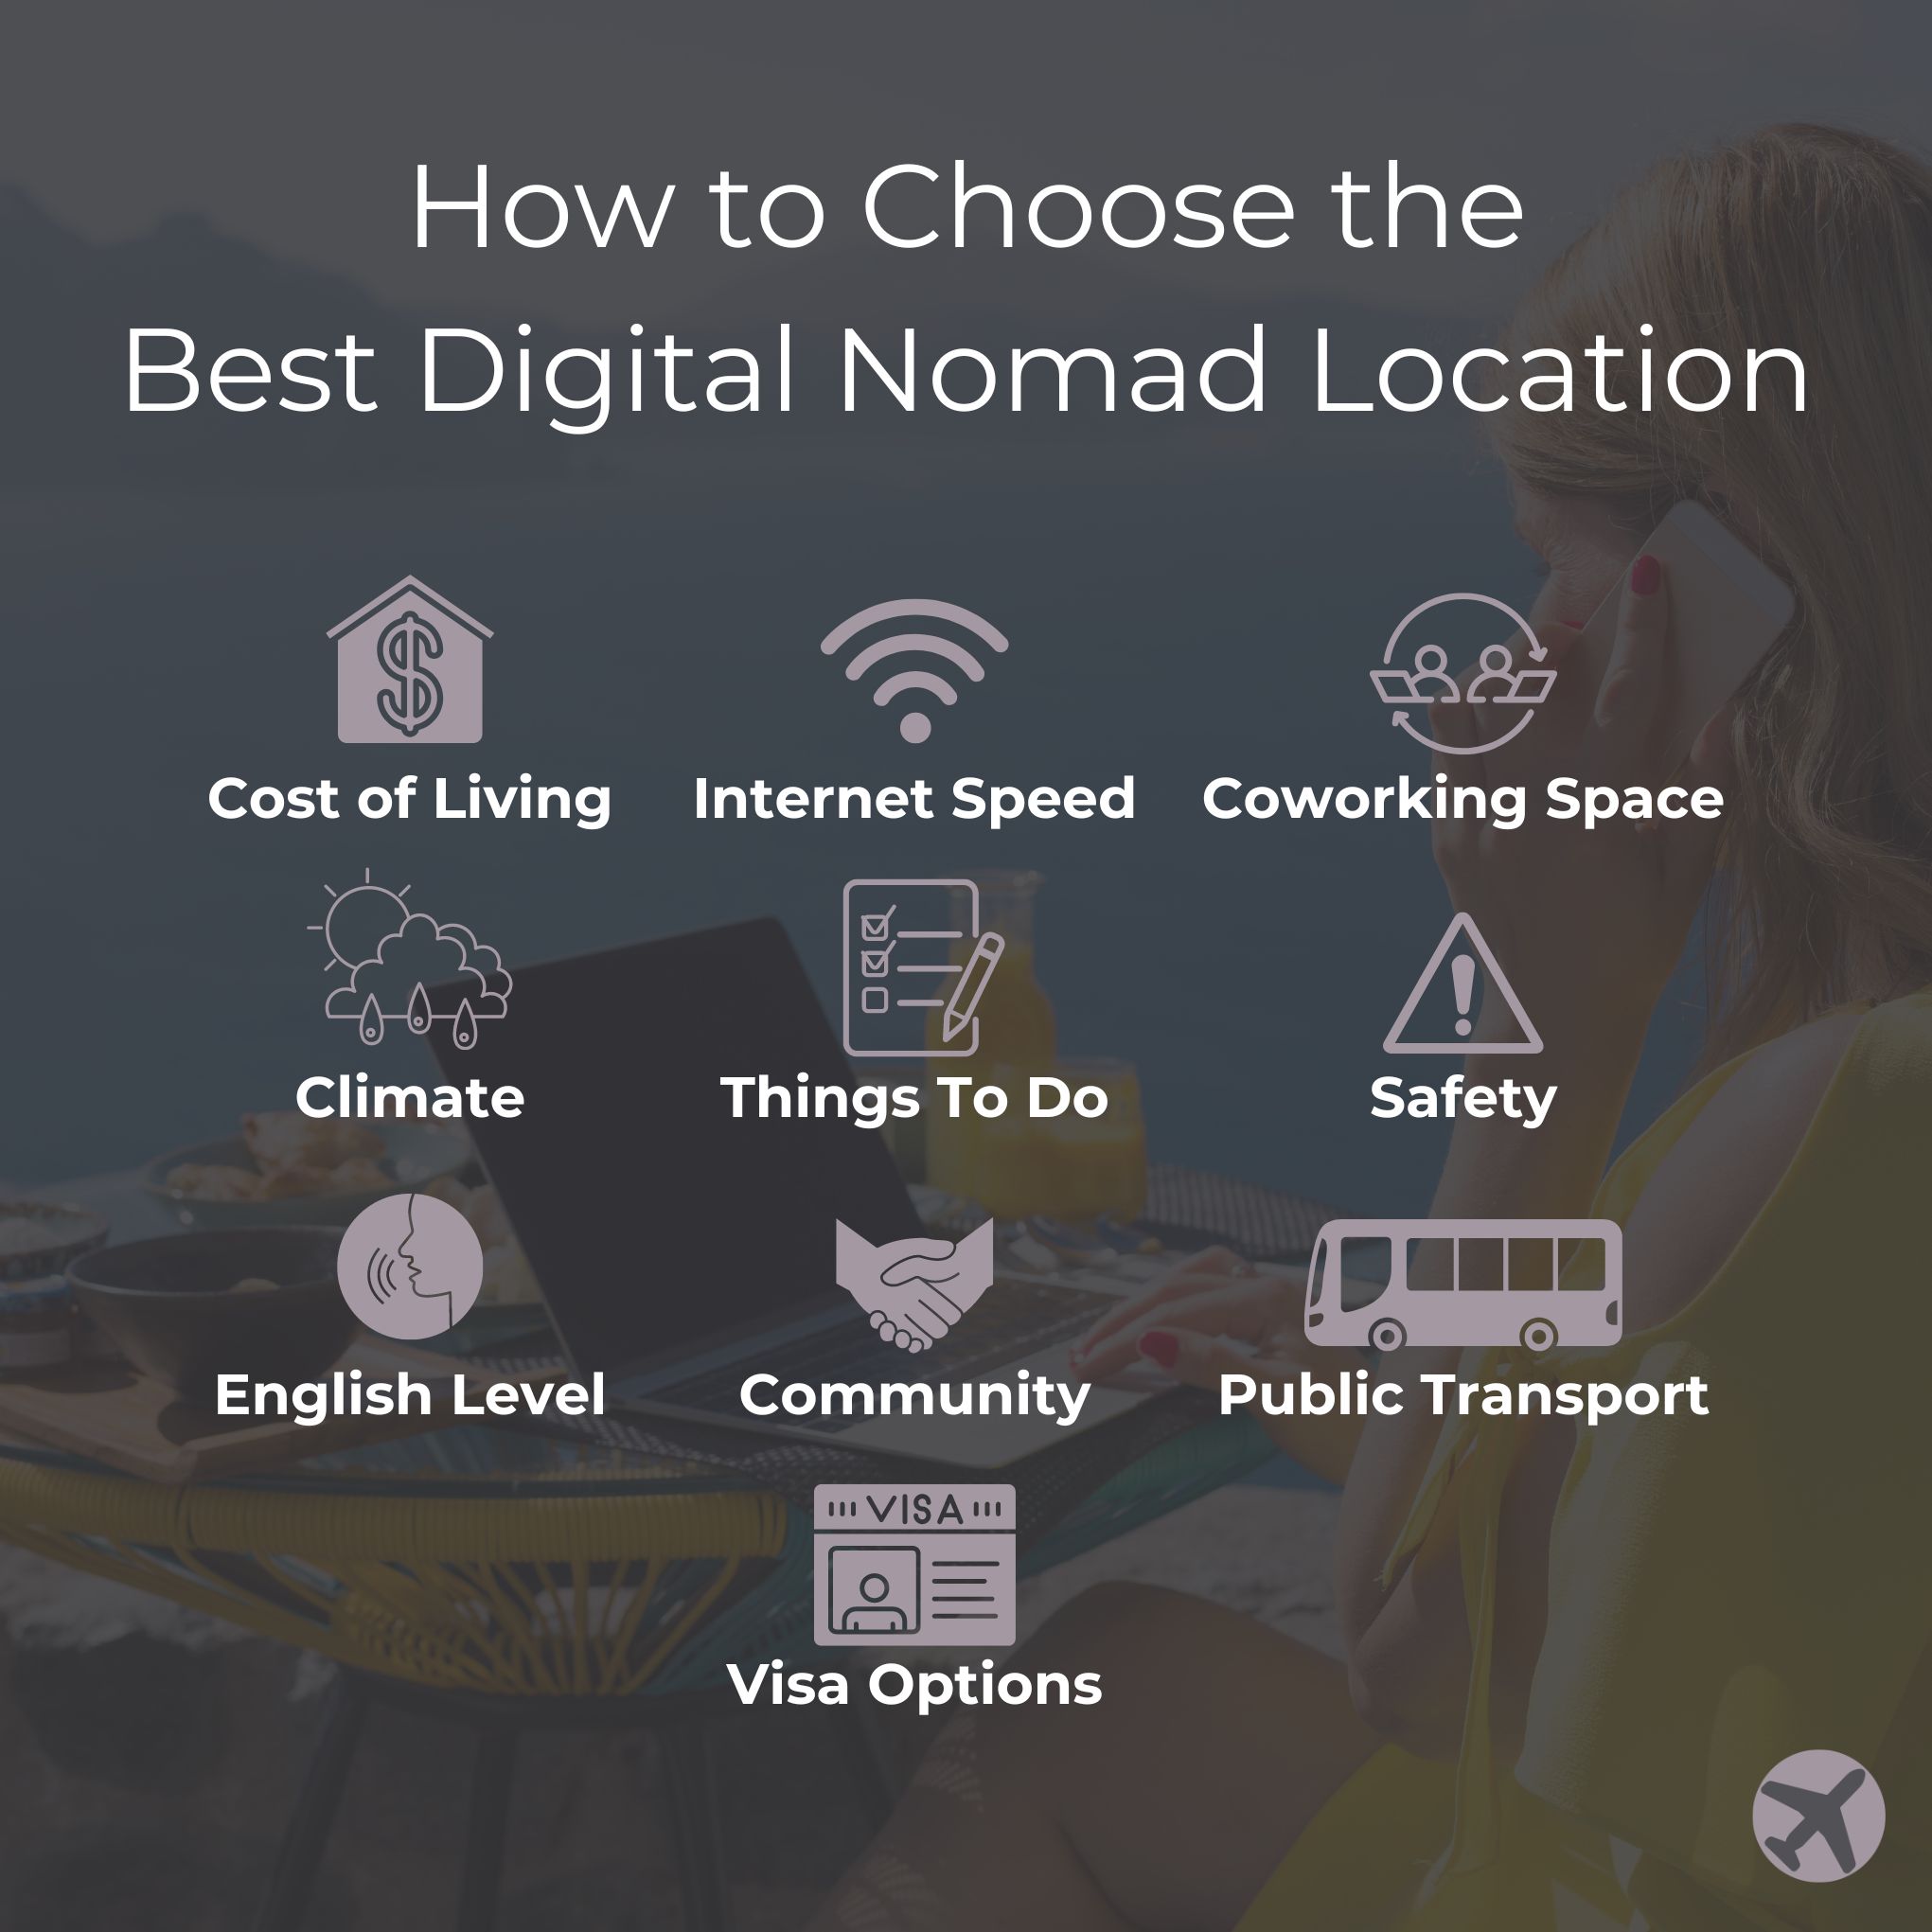 Original graphic explaining the aspects to consider when choosing the best digital nomad location like cost of living, internet speed, coworking space, climate, things to do, safety, english level, community, public transport, visa options. 